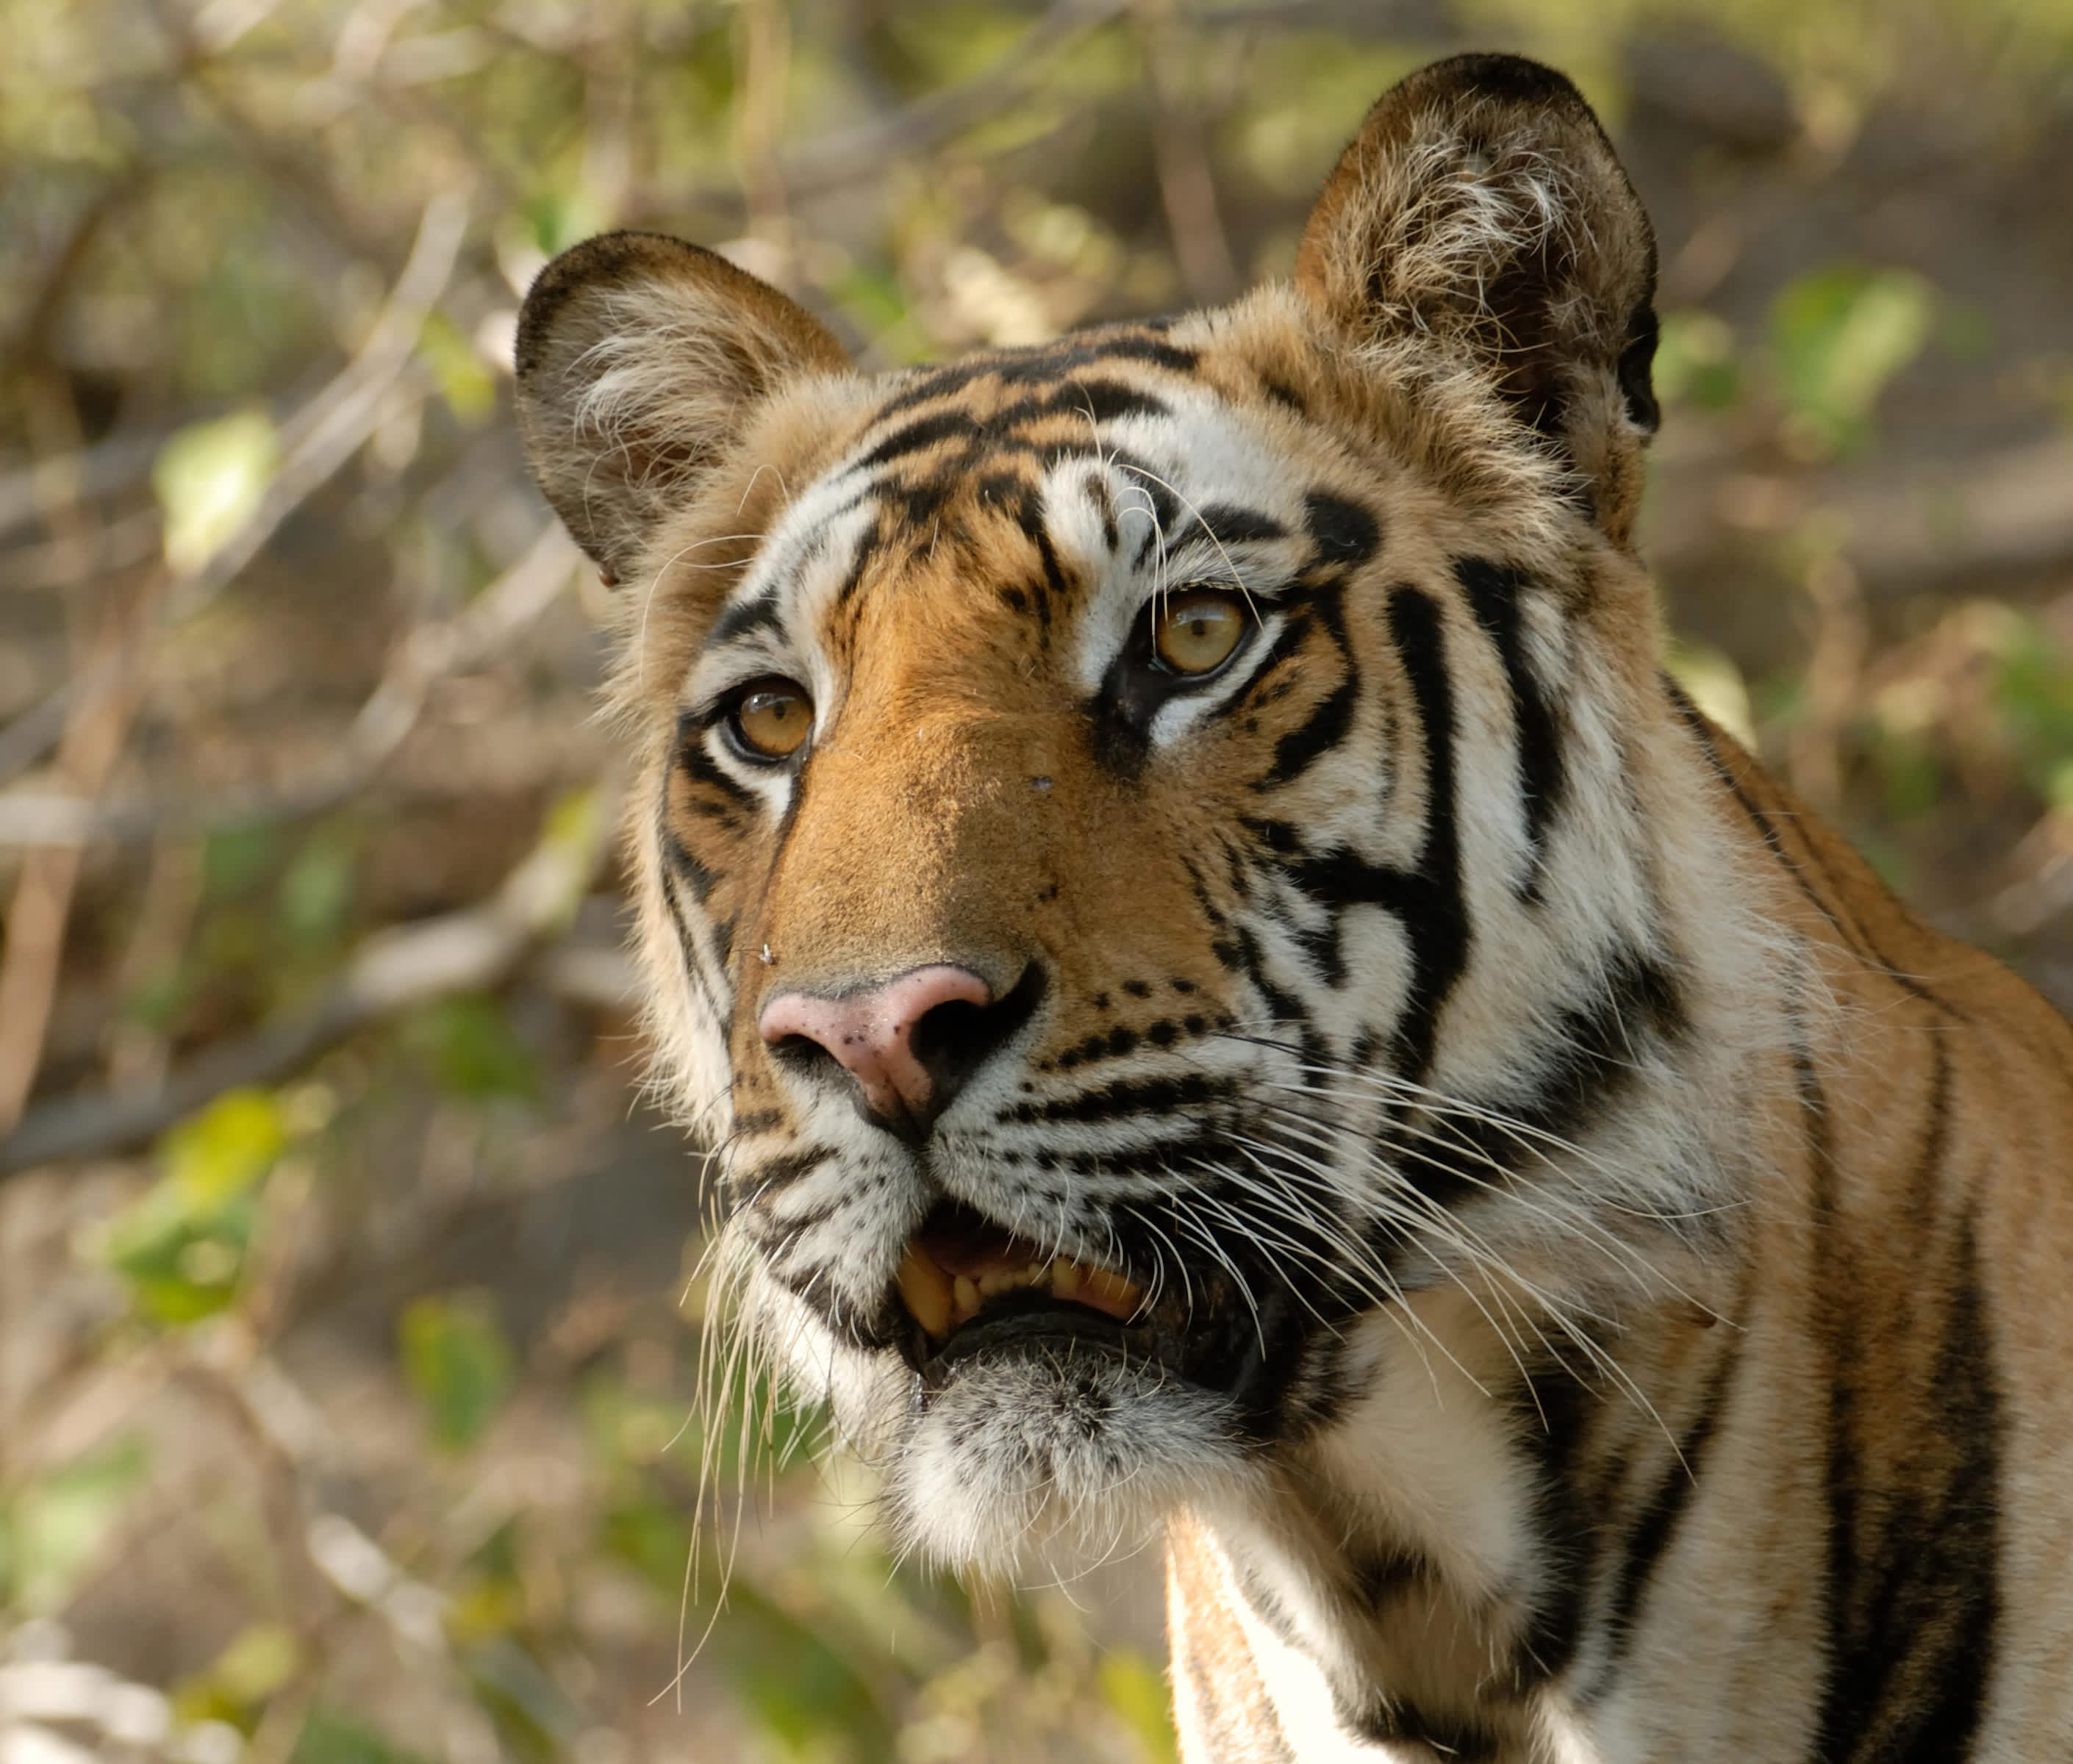 How to see tigers in India at Ranthambore National Park